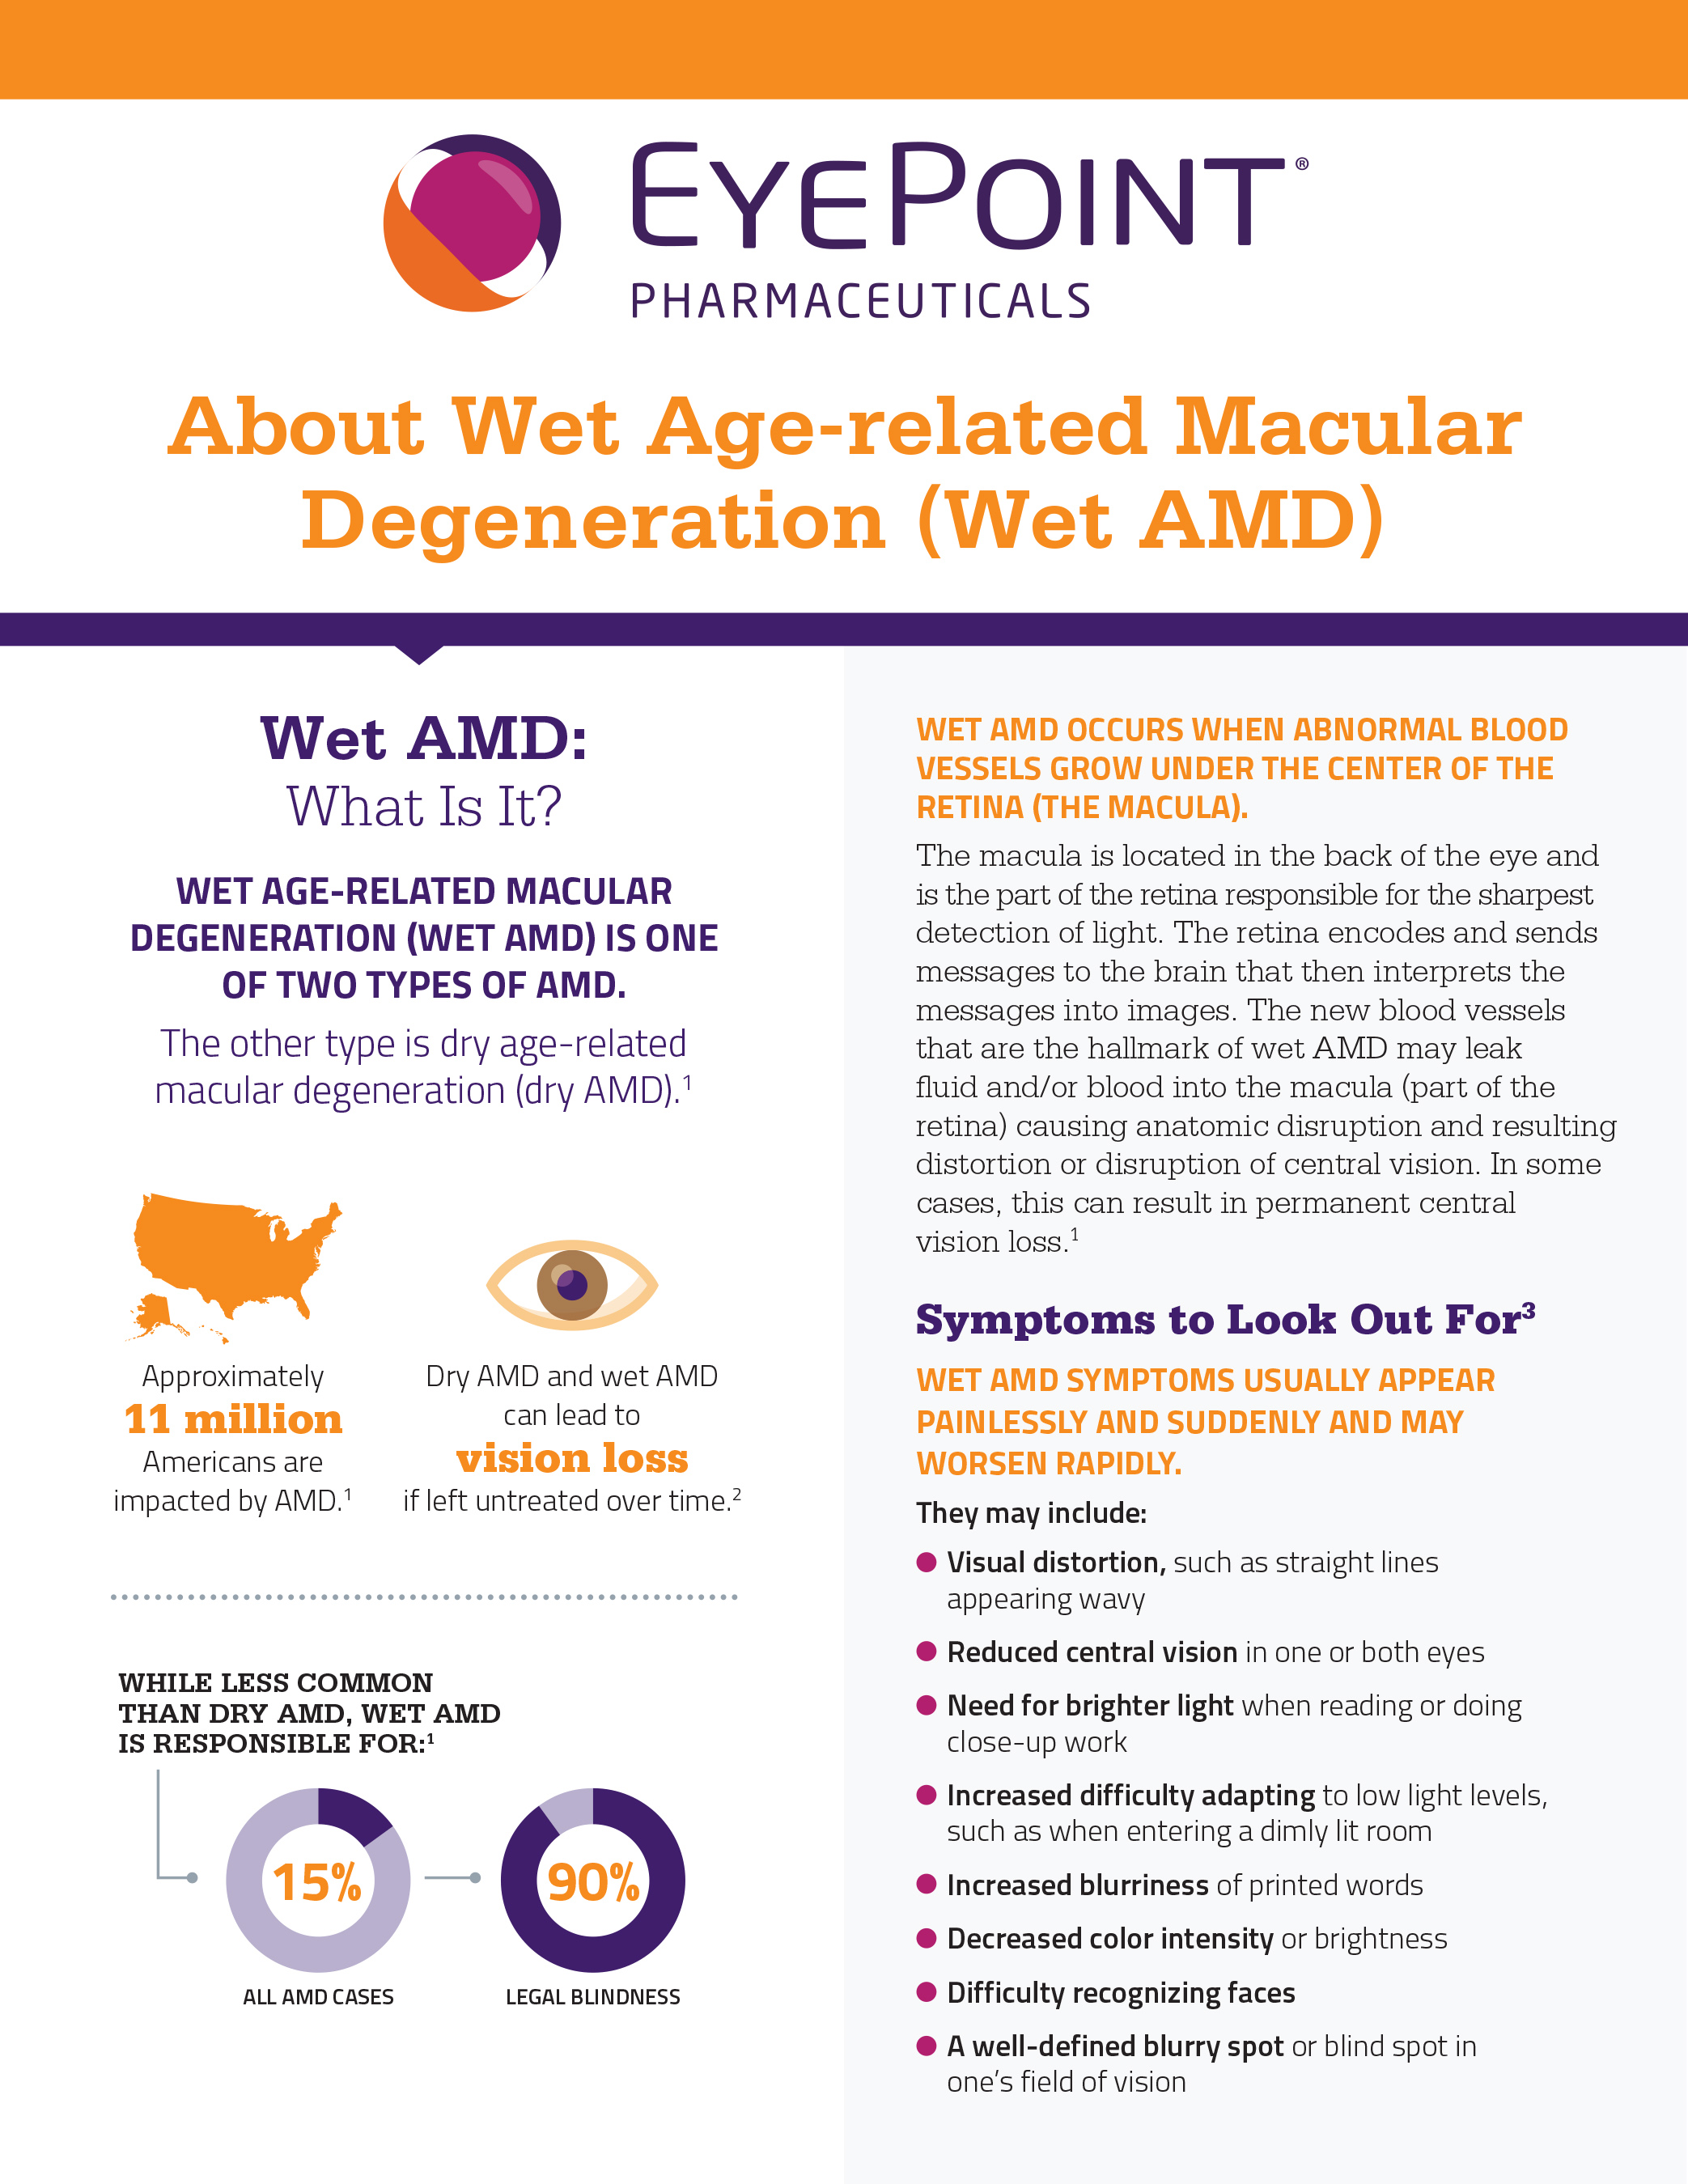 Learn more about wet AMD